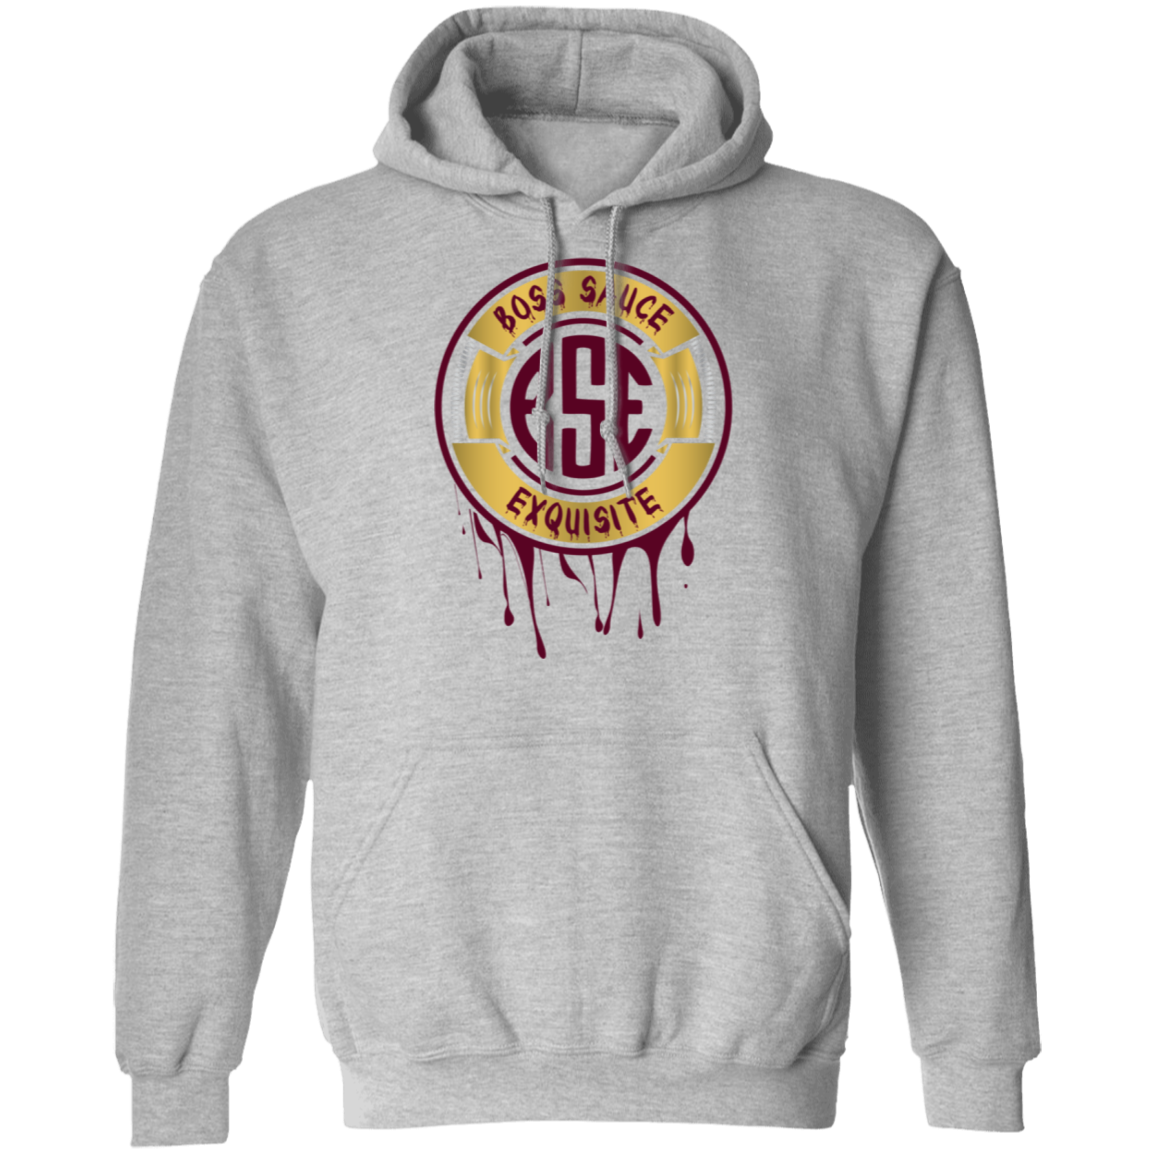 BSE Pullover Hoodie 8 oz. – Boss Sauce Exquisite Local